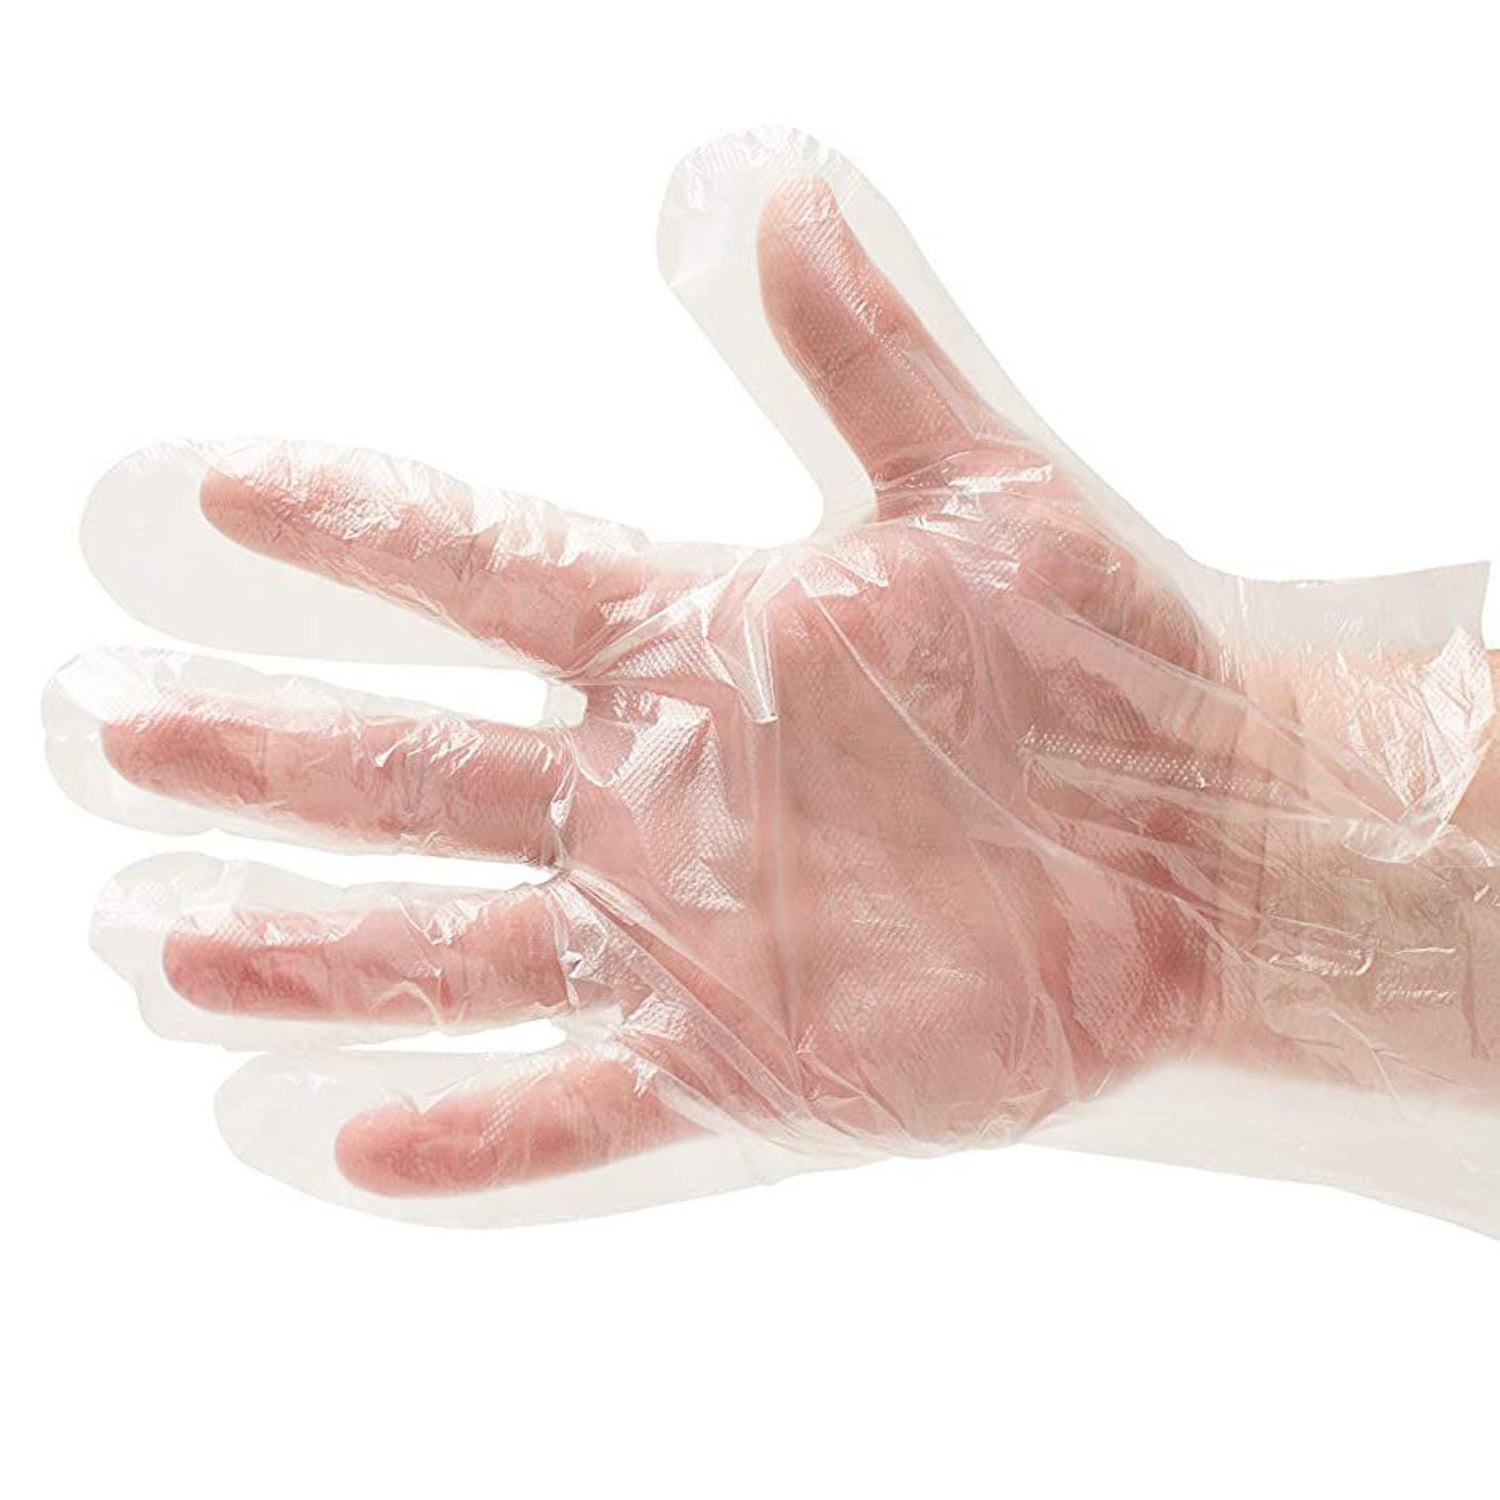 Polythene Disposable Gloves | Large | Pack of 100 Pieces (1)